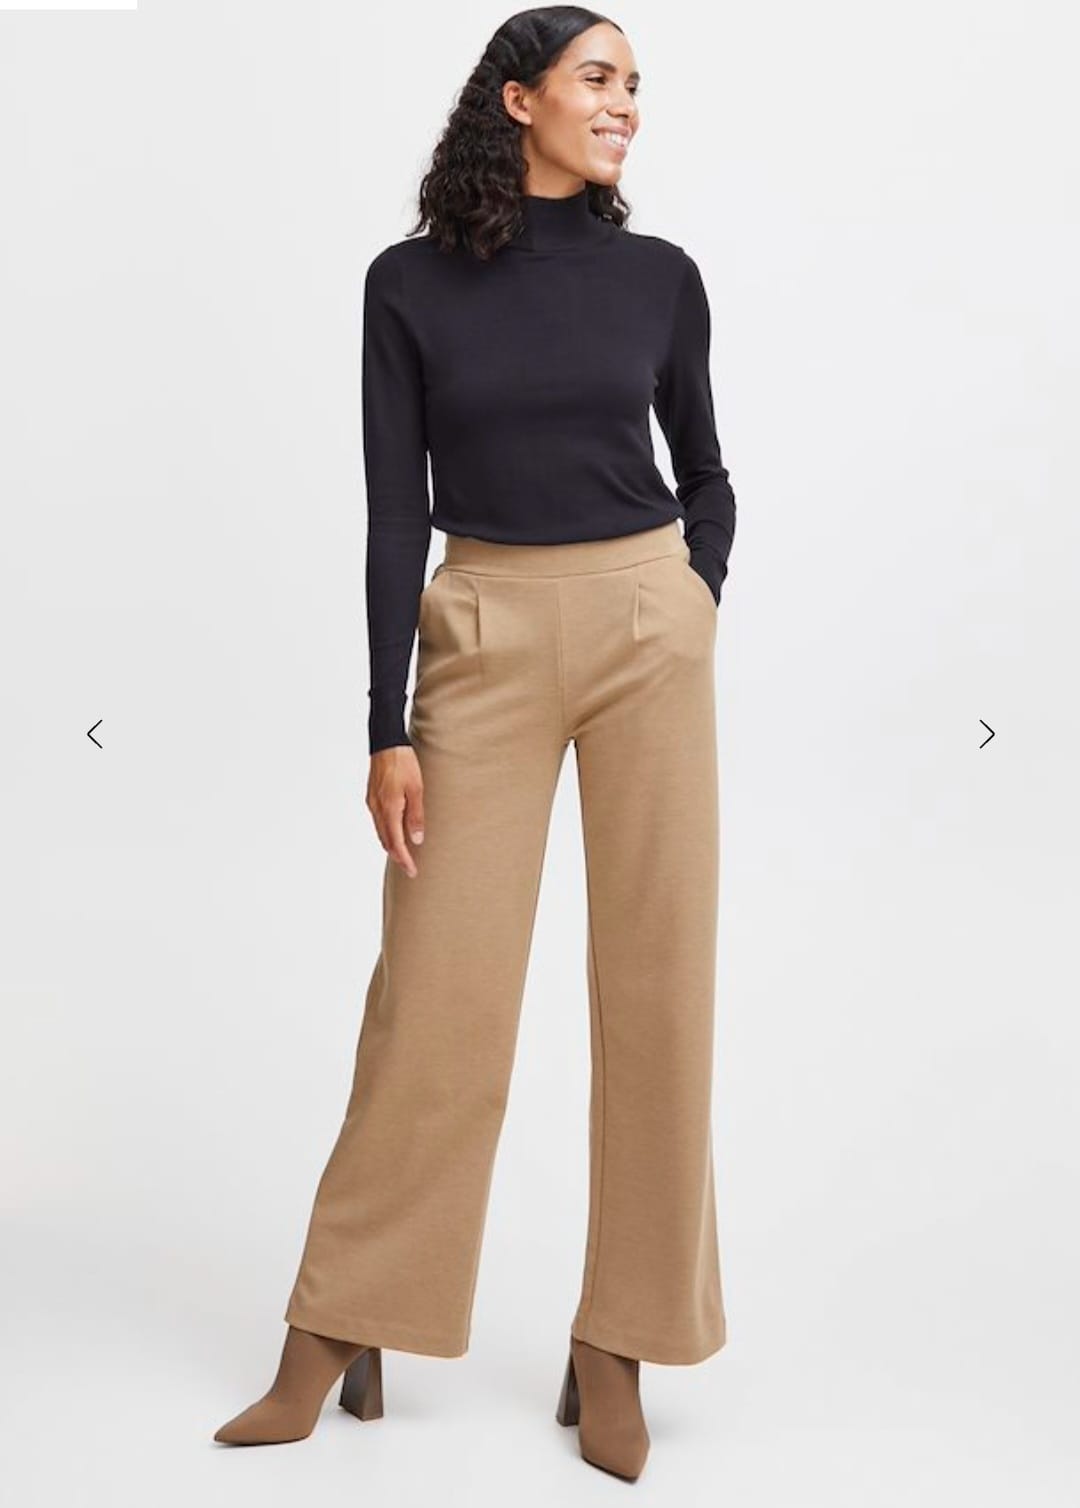 BYoung Tan Wide Leg Trousers